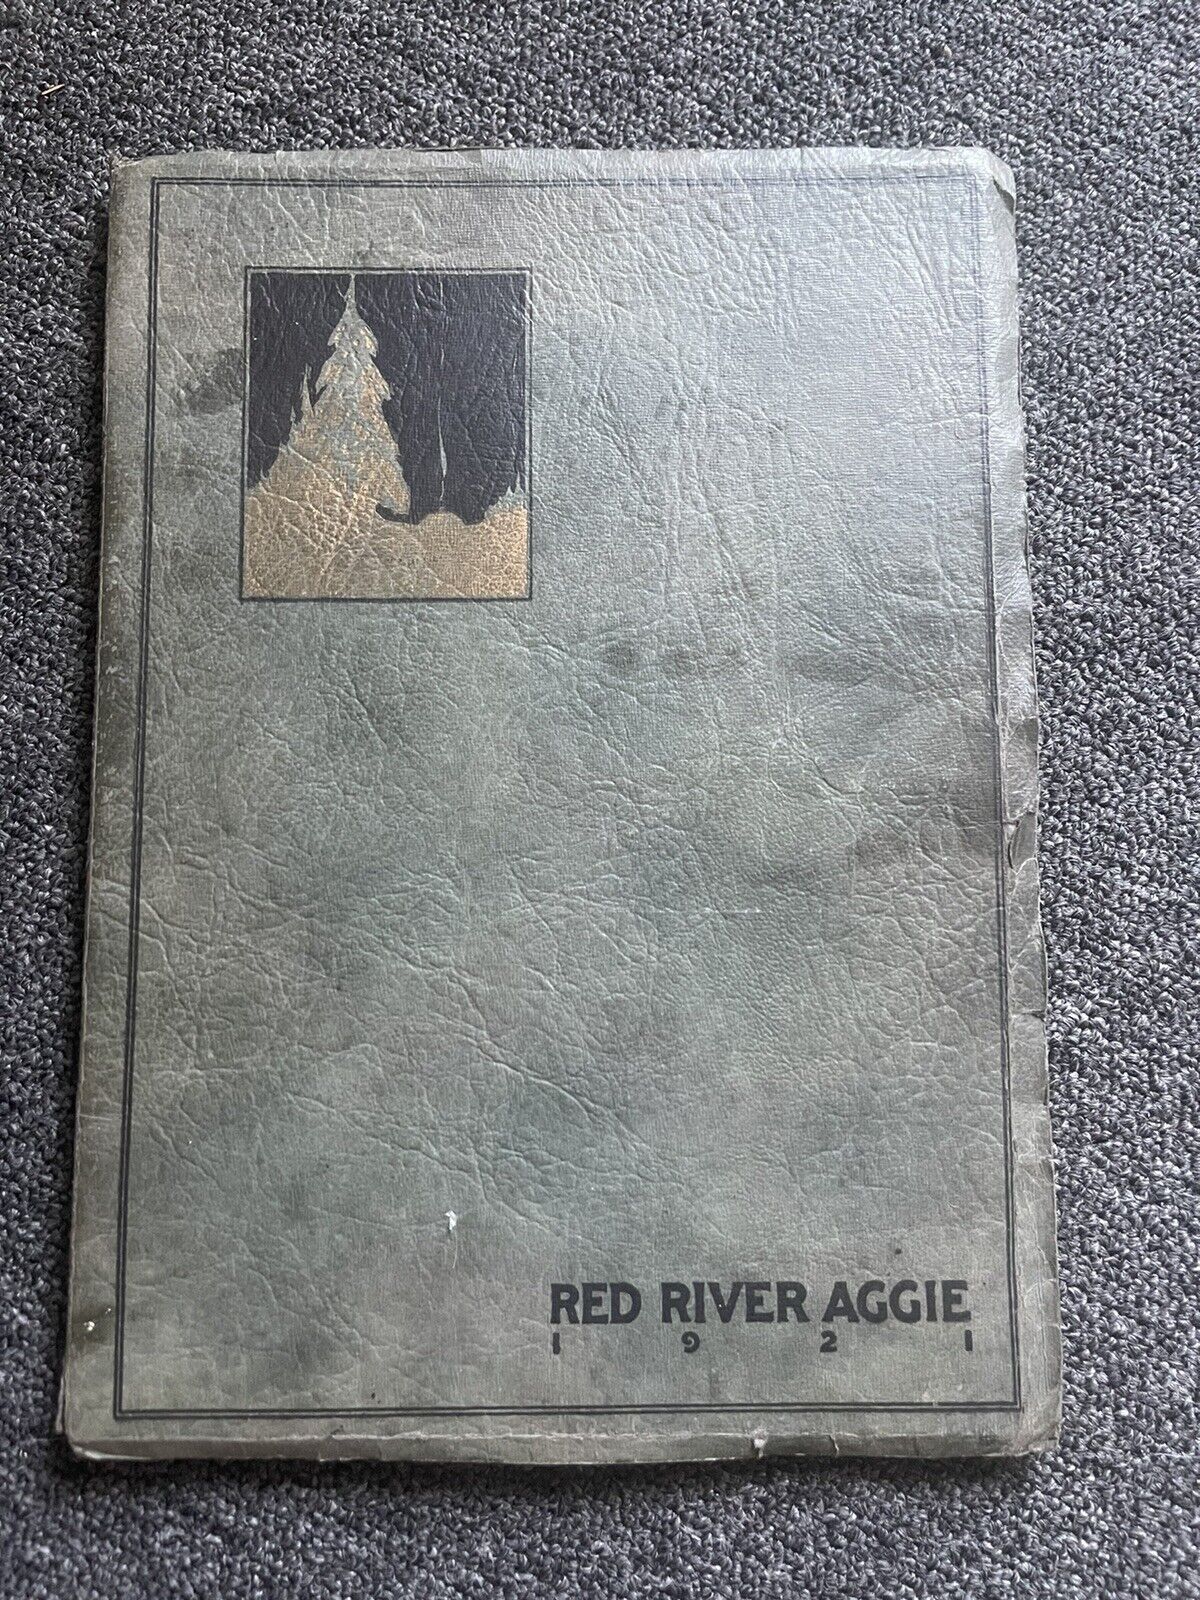 1921 red river aggie senior yearbook nw school of agriculture crookston Minn